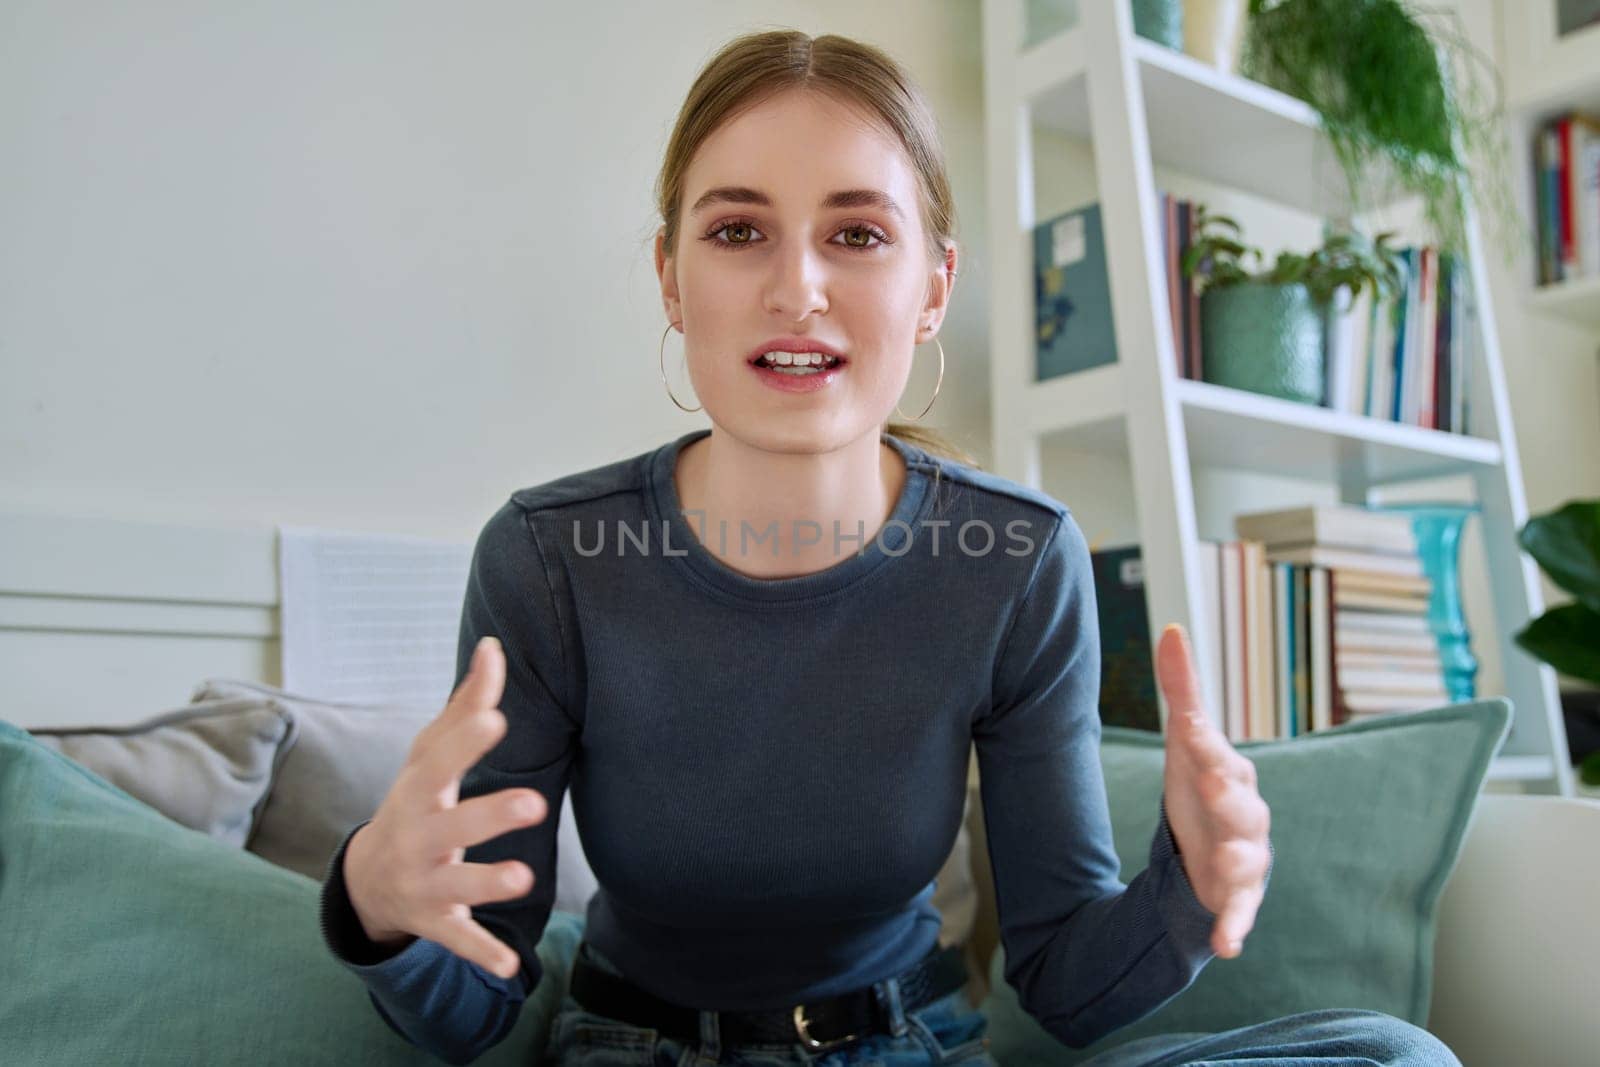 Web camera view of teenage girl 16,17,18 years old talking looking in camera, online meeting, internet video call chat conference. Attractive teenager female blogger vlogger recording video in home